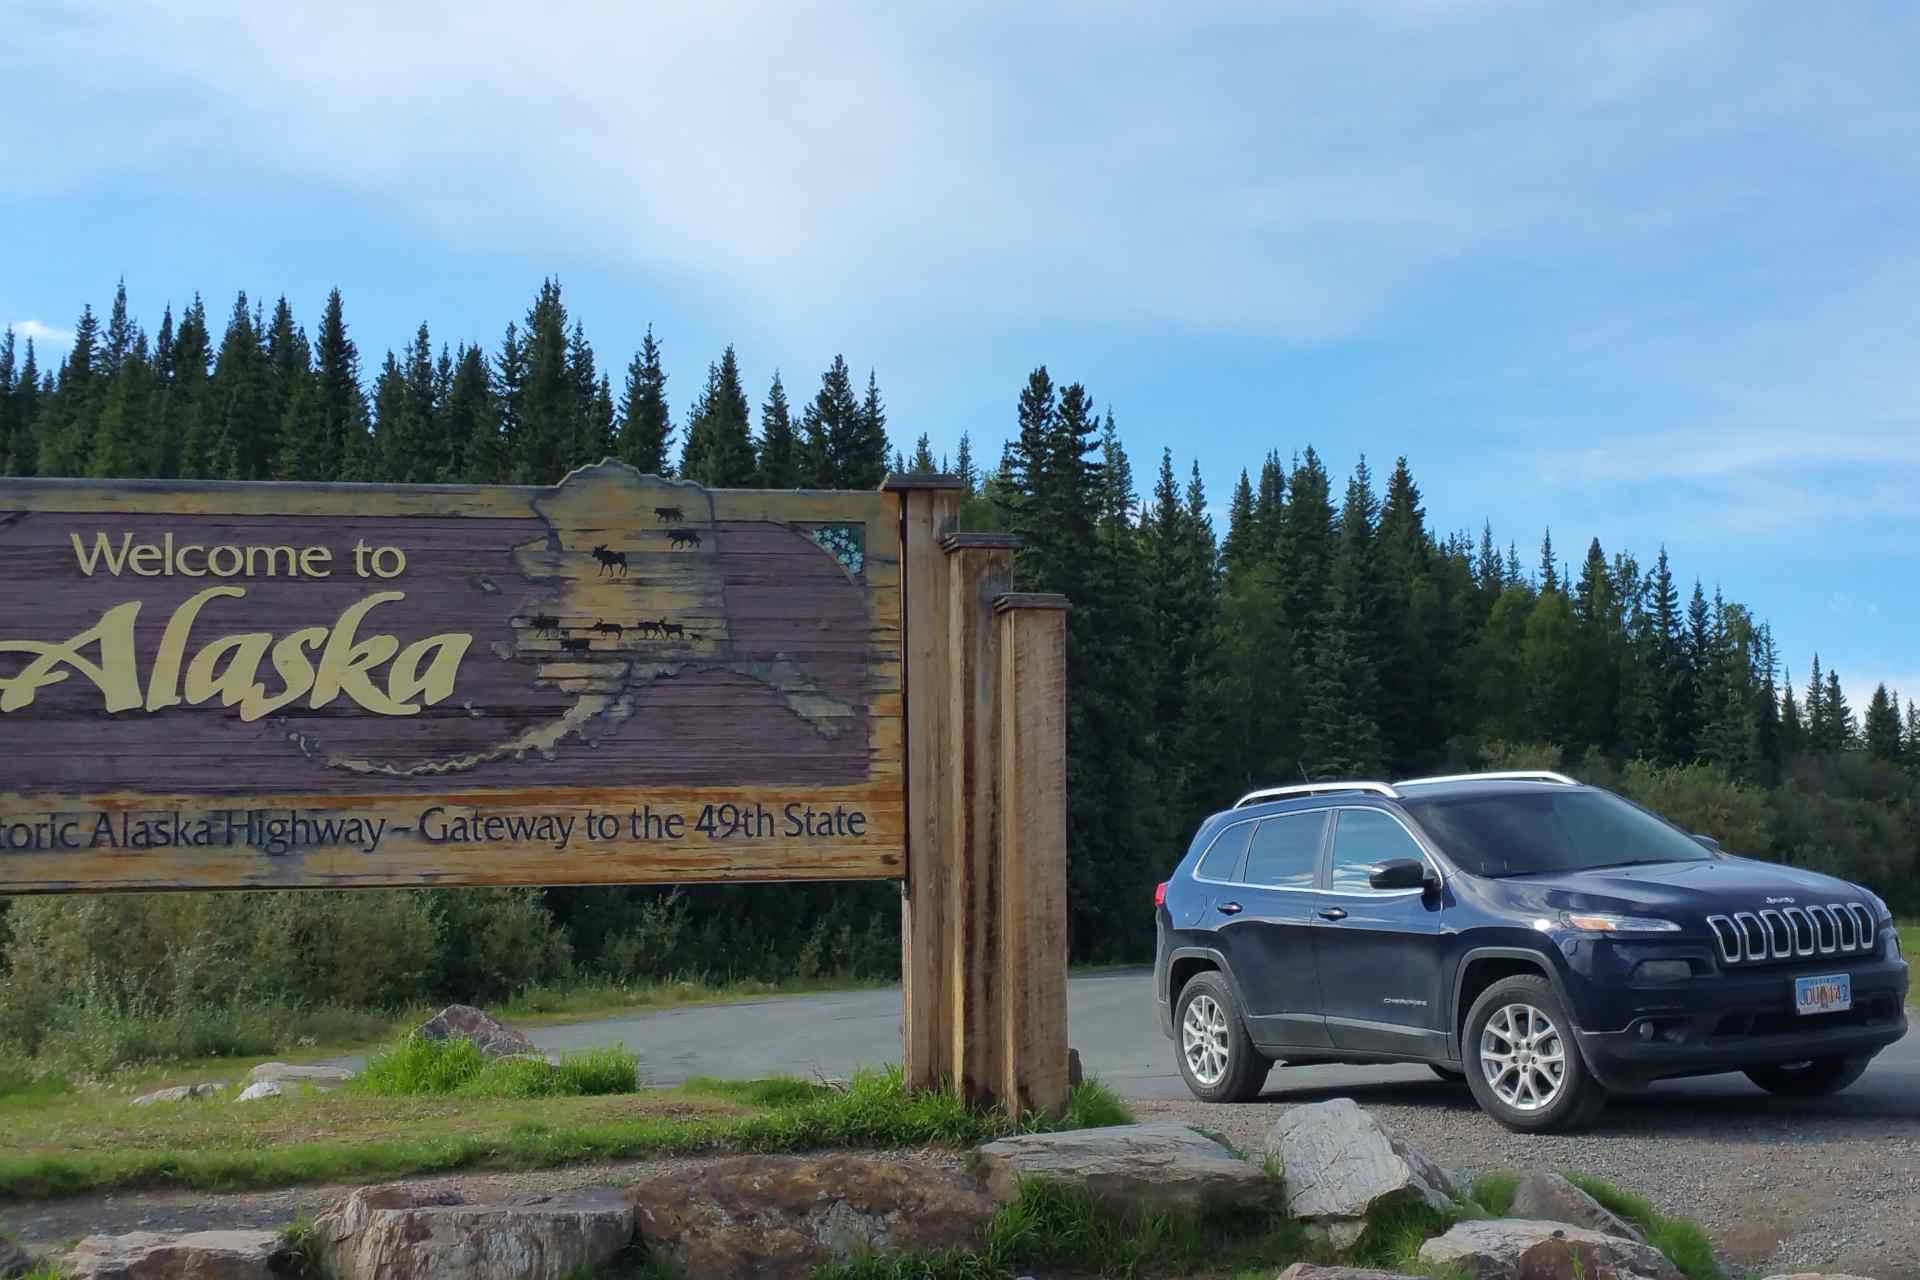 lateral view of a blue SUV during daylight on the right side of a welcome to alaska sign and in front of trees